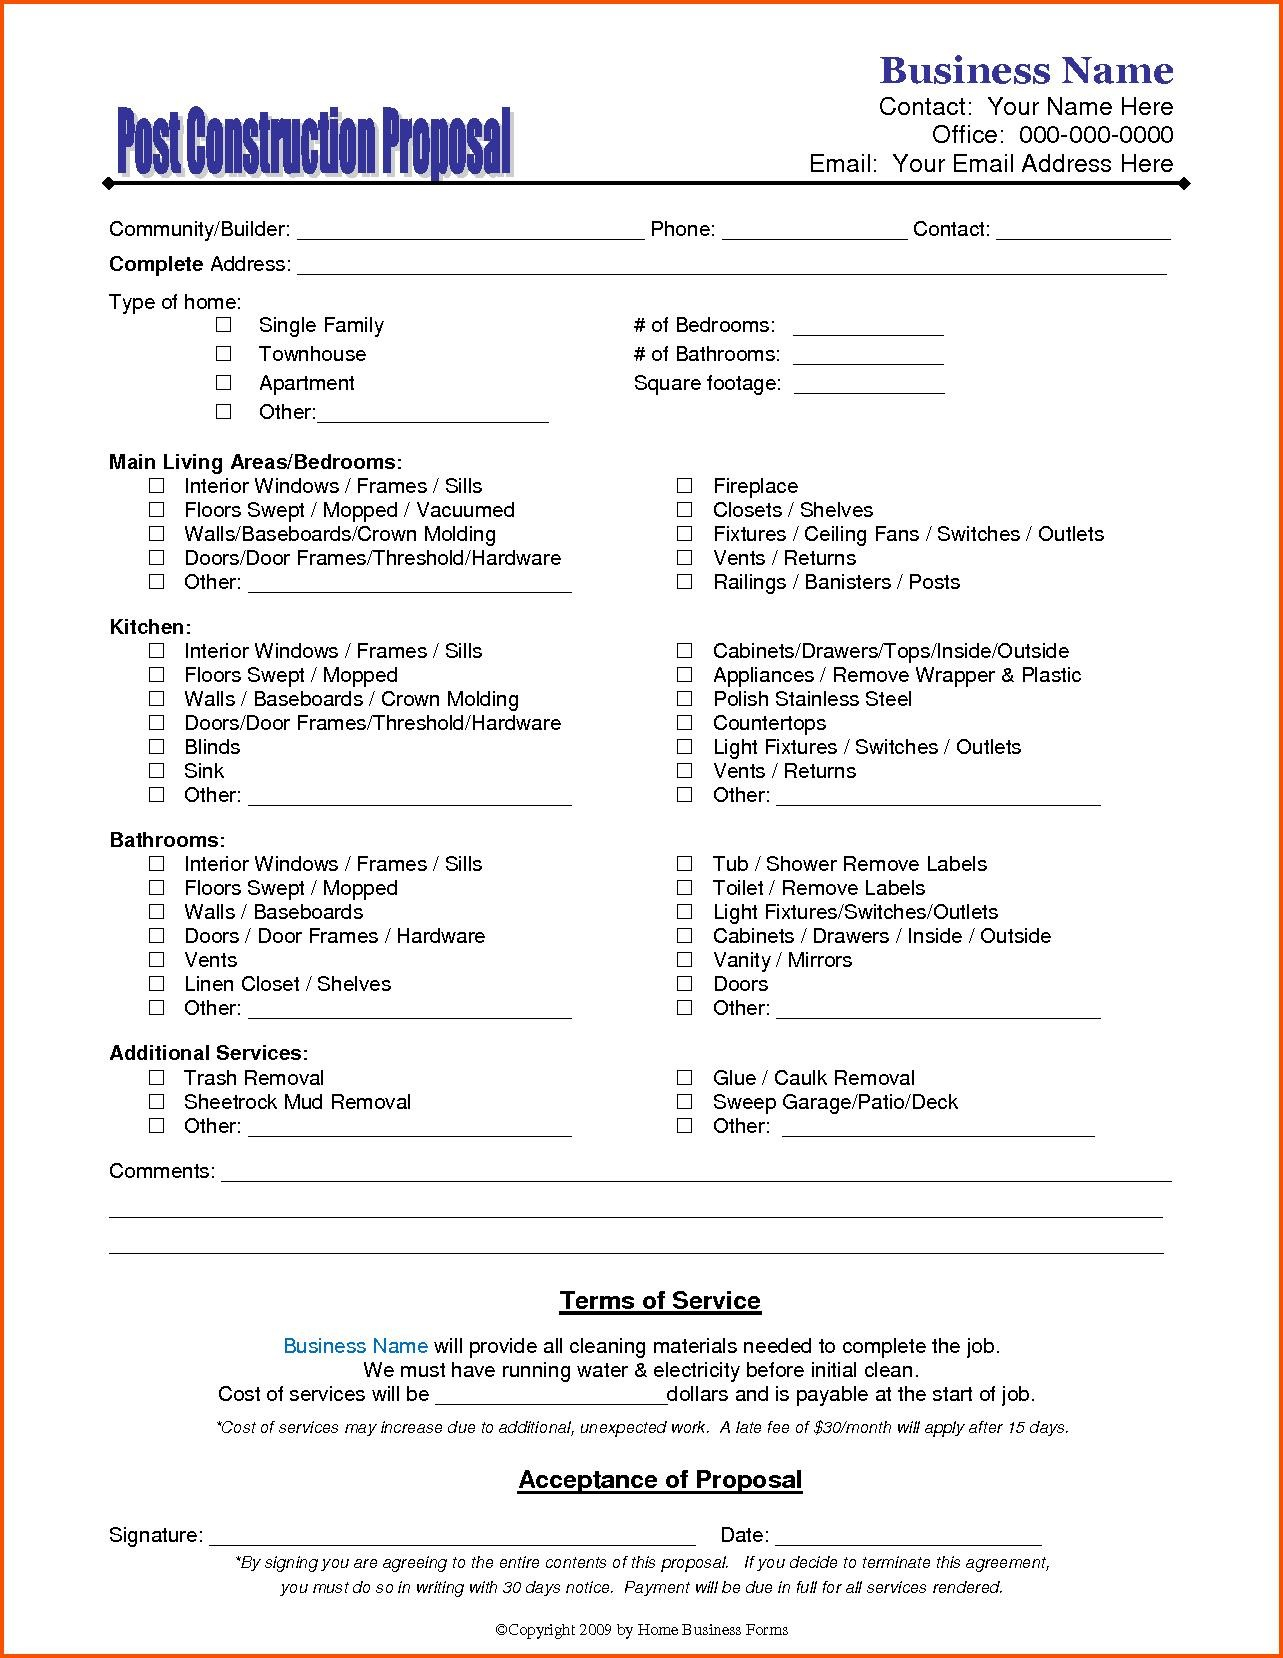 Post Construction Cleaning Proposal Template Sample 1928 throughout proportions 1283 X 1658